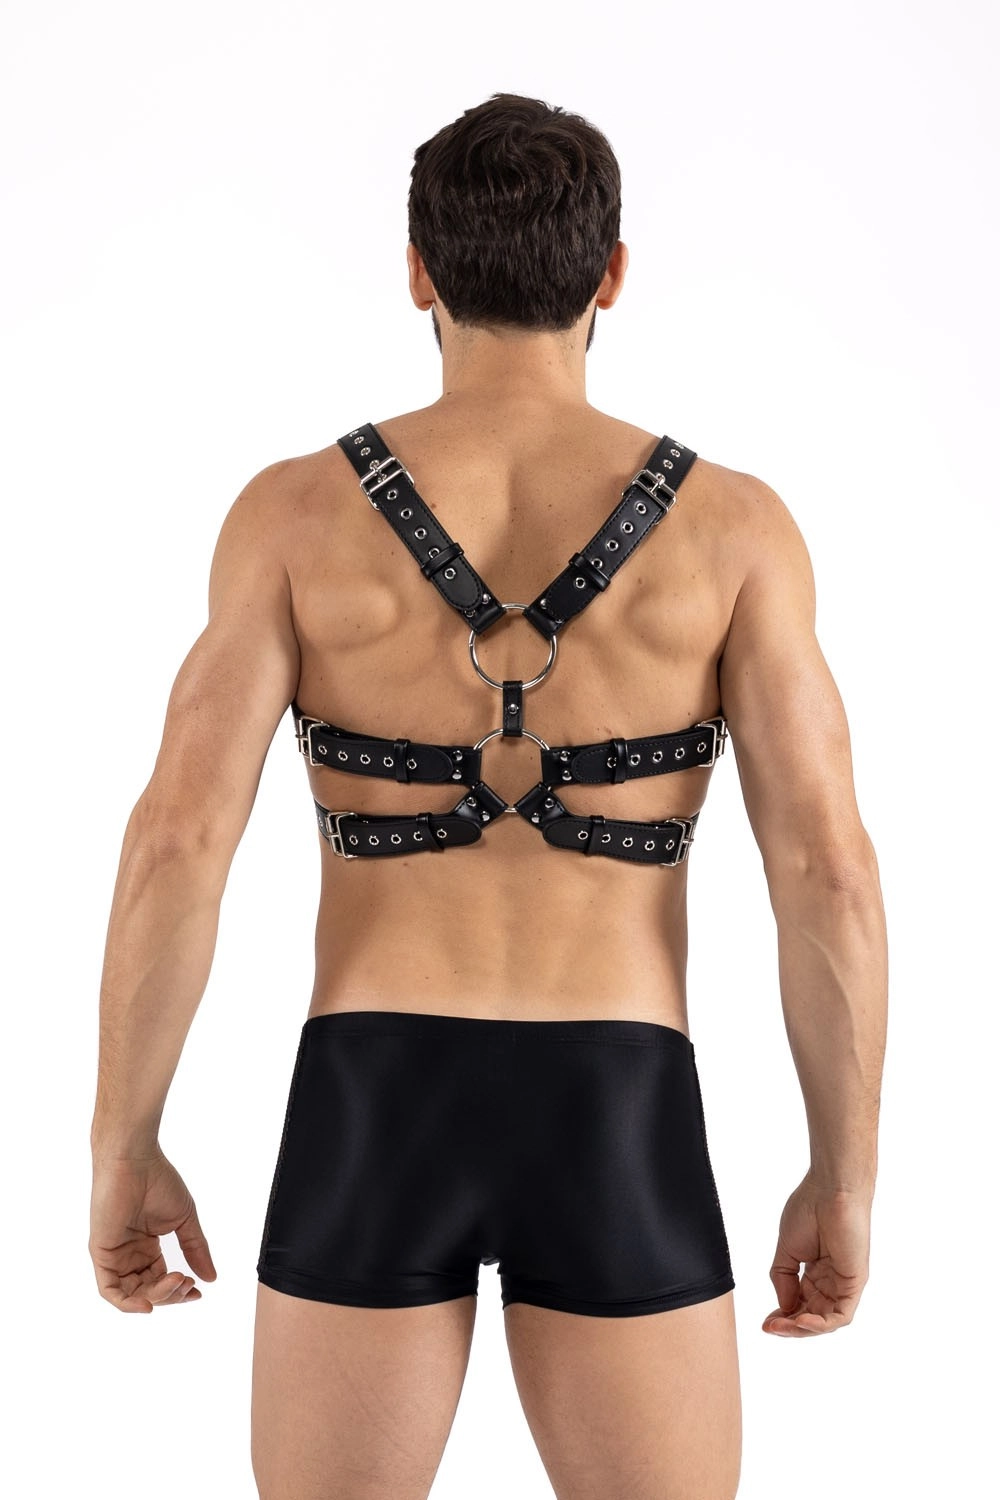 VISION x Harness in Schwarz Model " SUPER VISION ", Gay Harness  